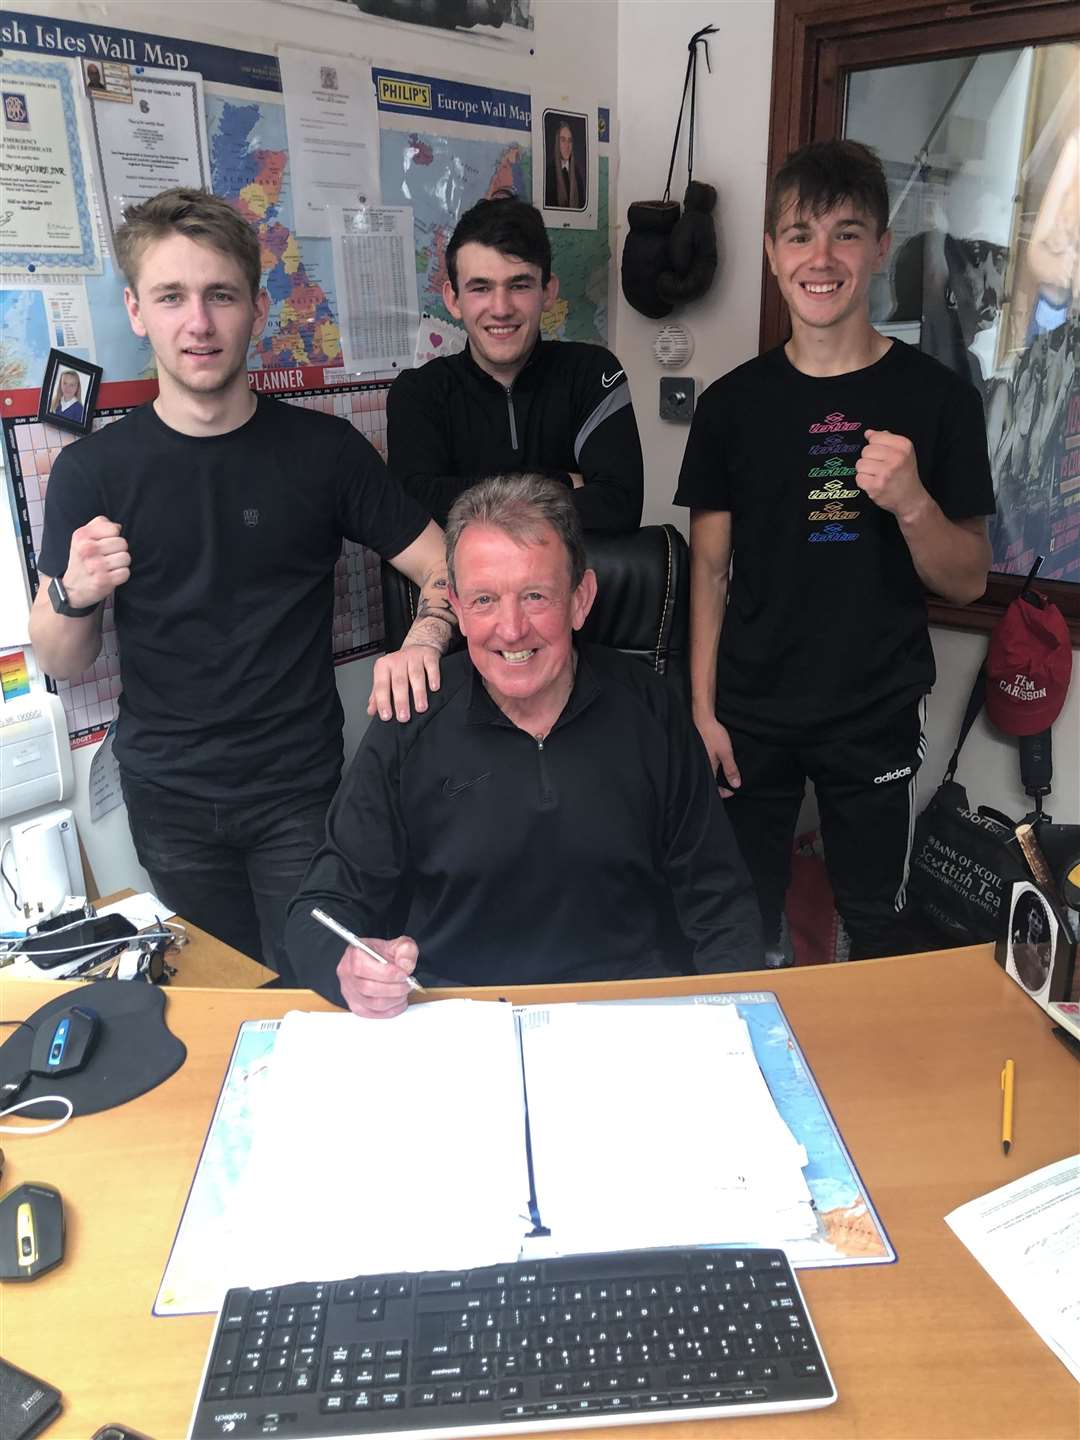 George Stewart, Callum Turnbull and Adian Williamson are in the process of turning professional under the guidance of Inverness City Boxing Club head coach Laurie Redfern.